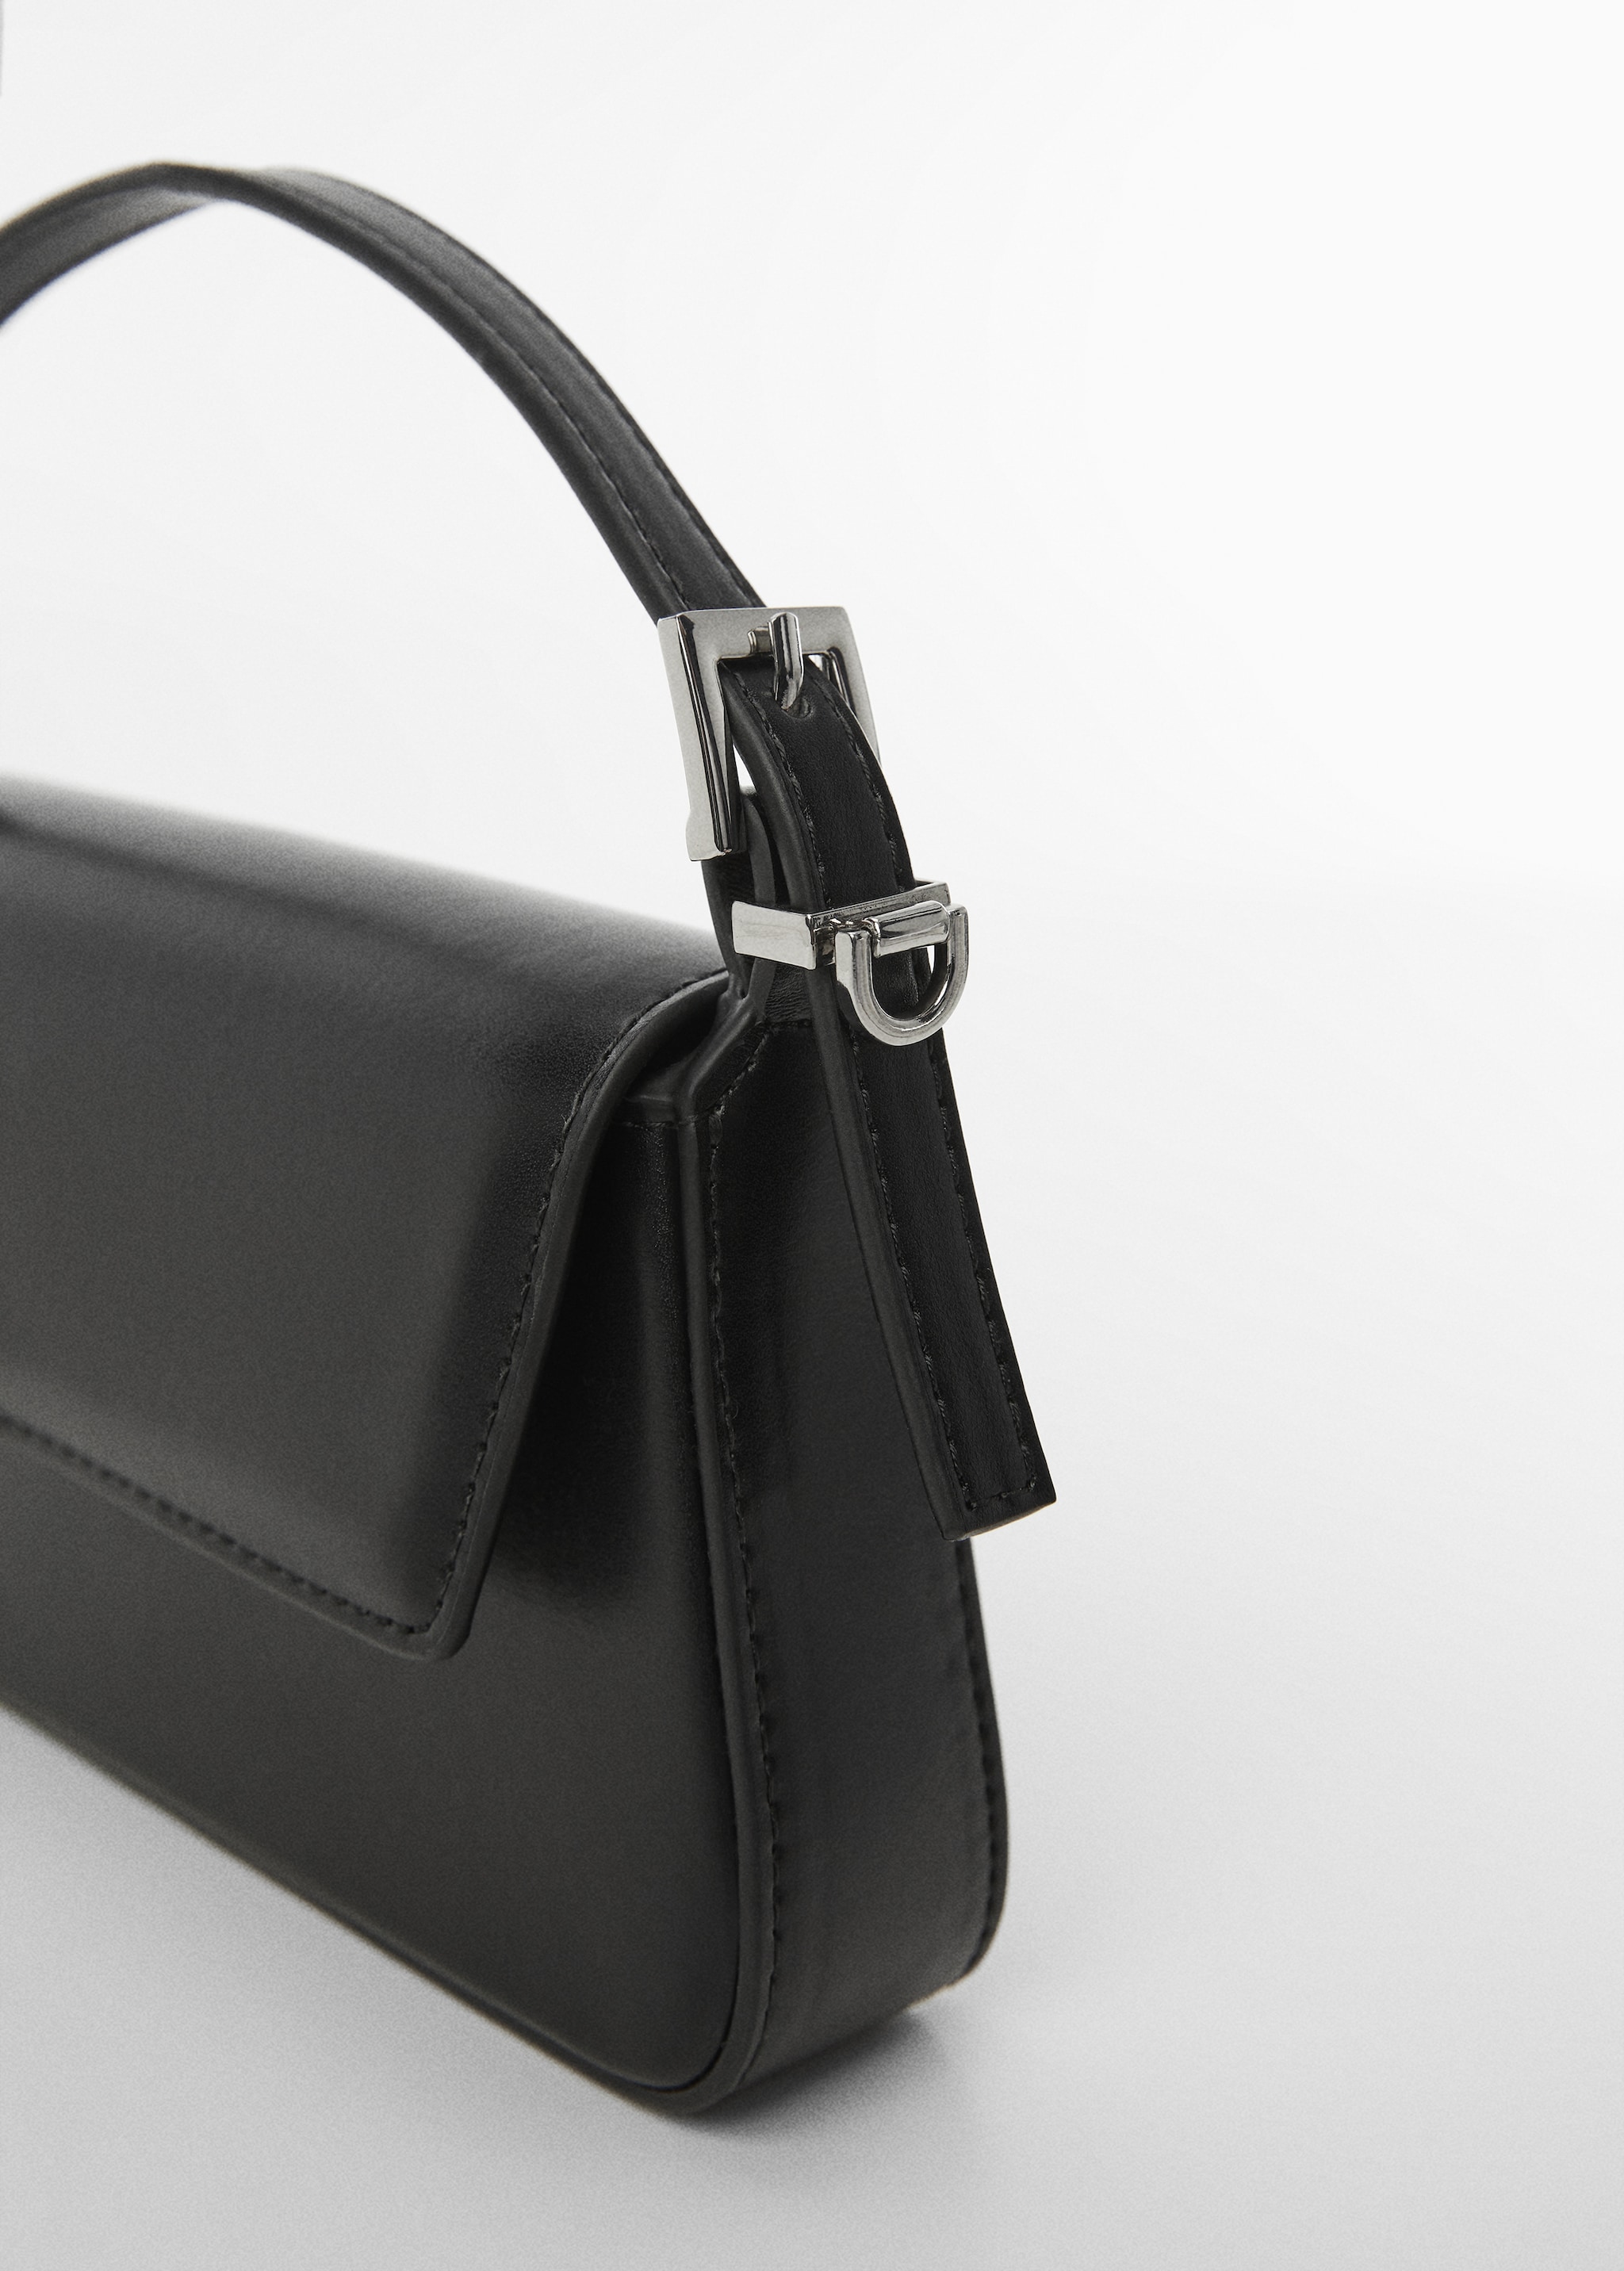 Double strap bag with flap - Details of the article 1